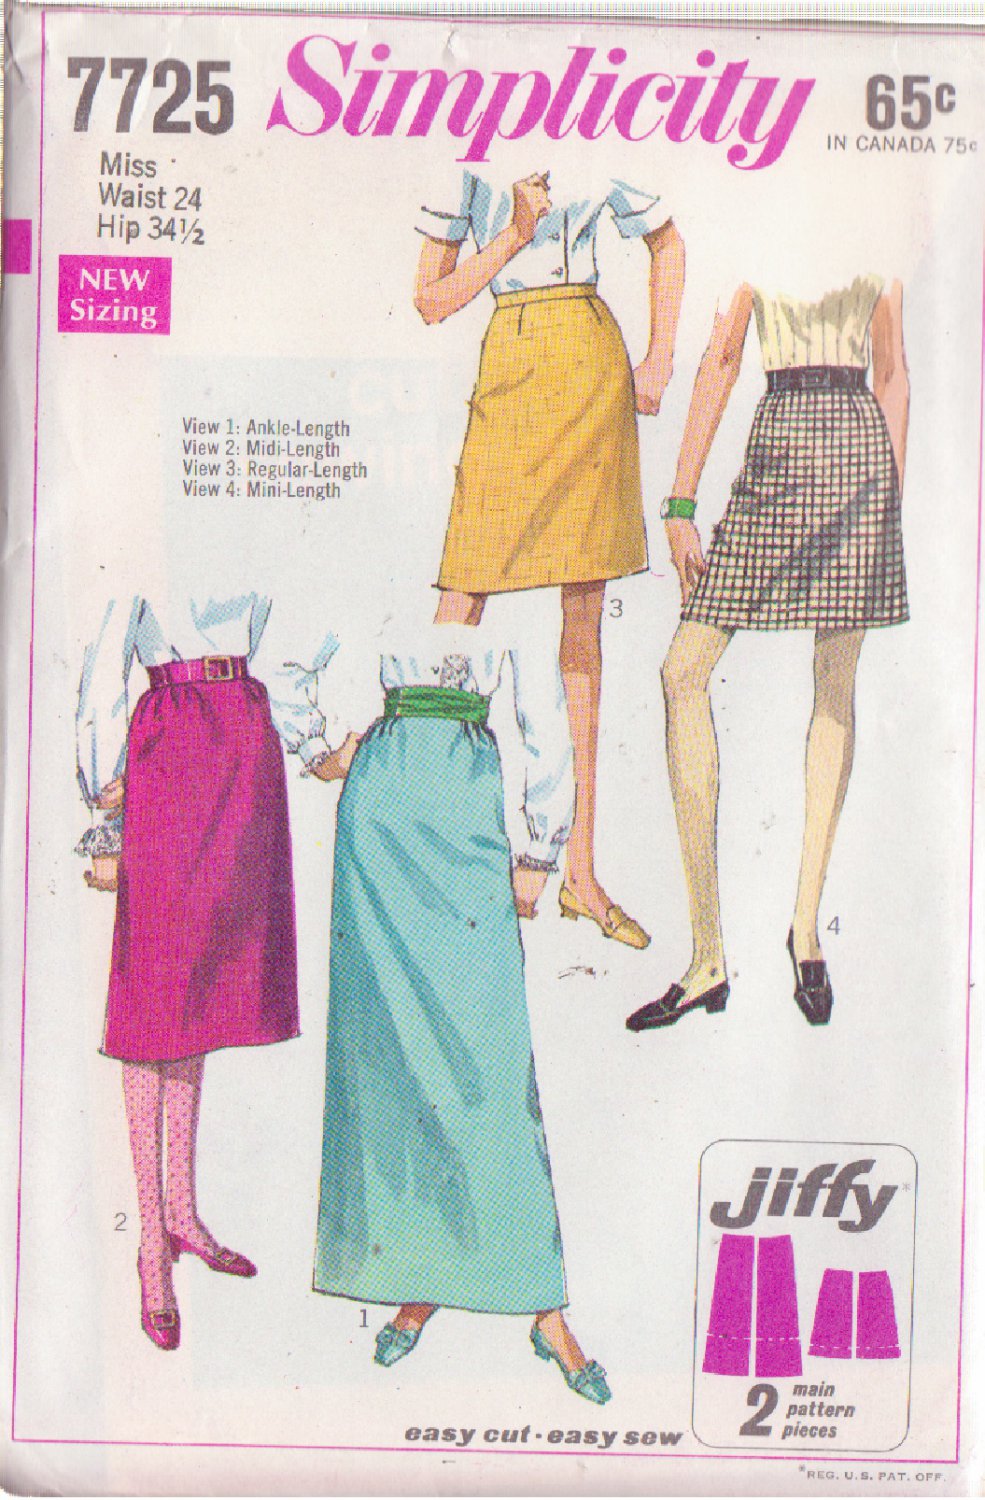 Simplicity Pattern 7725 Misses Skirts In 4 Lengths Size 24